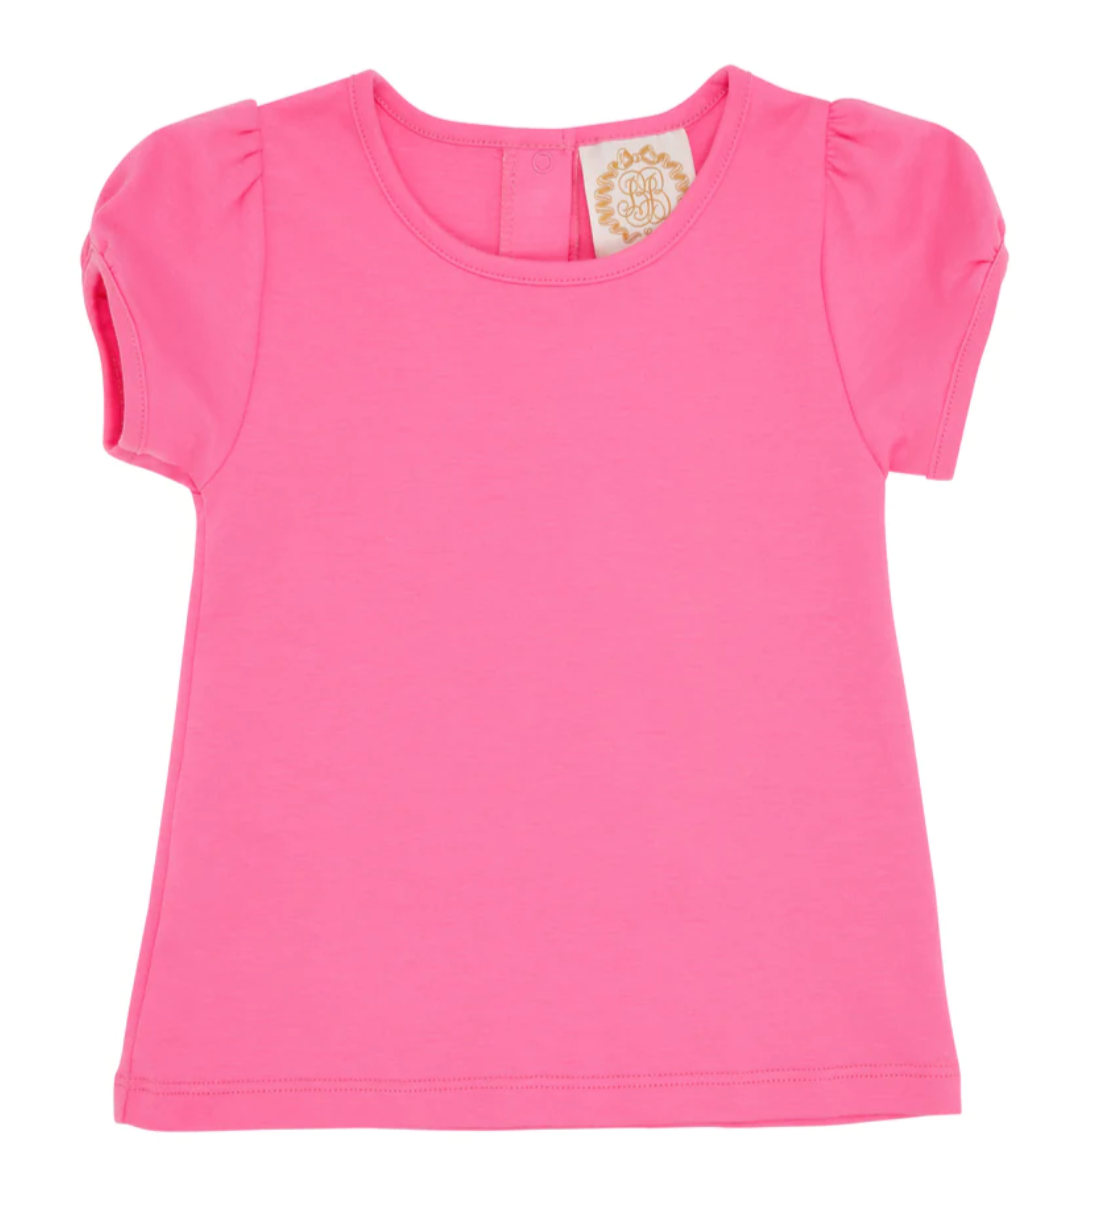 Winter Park Pink Penny's Play Shirt